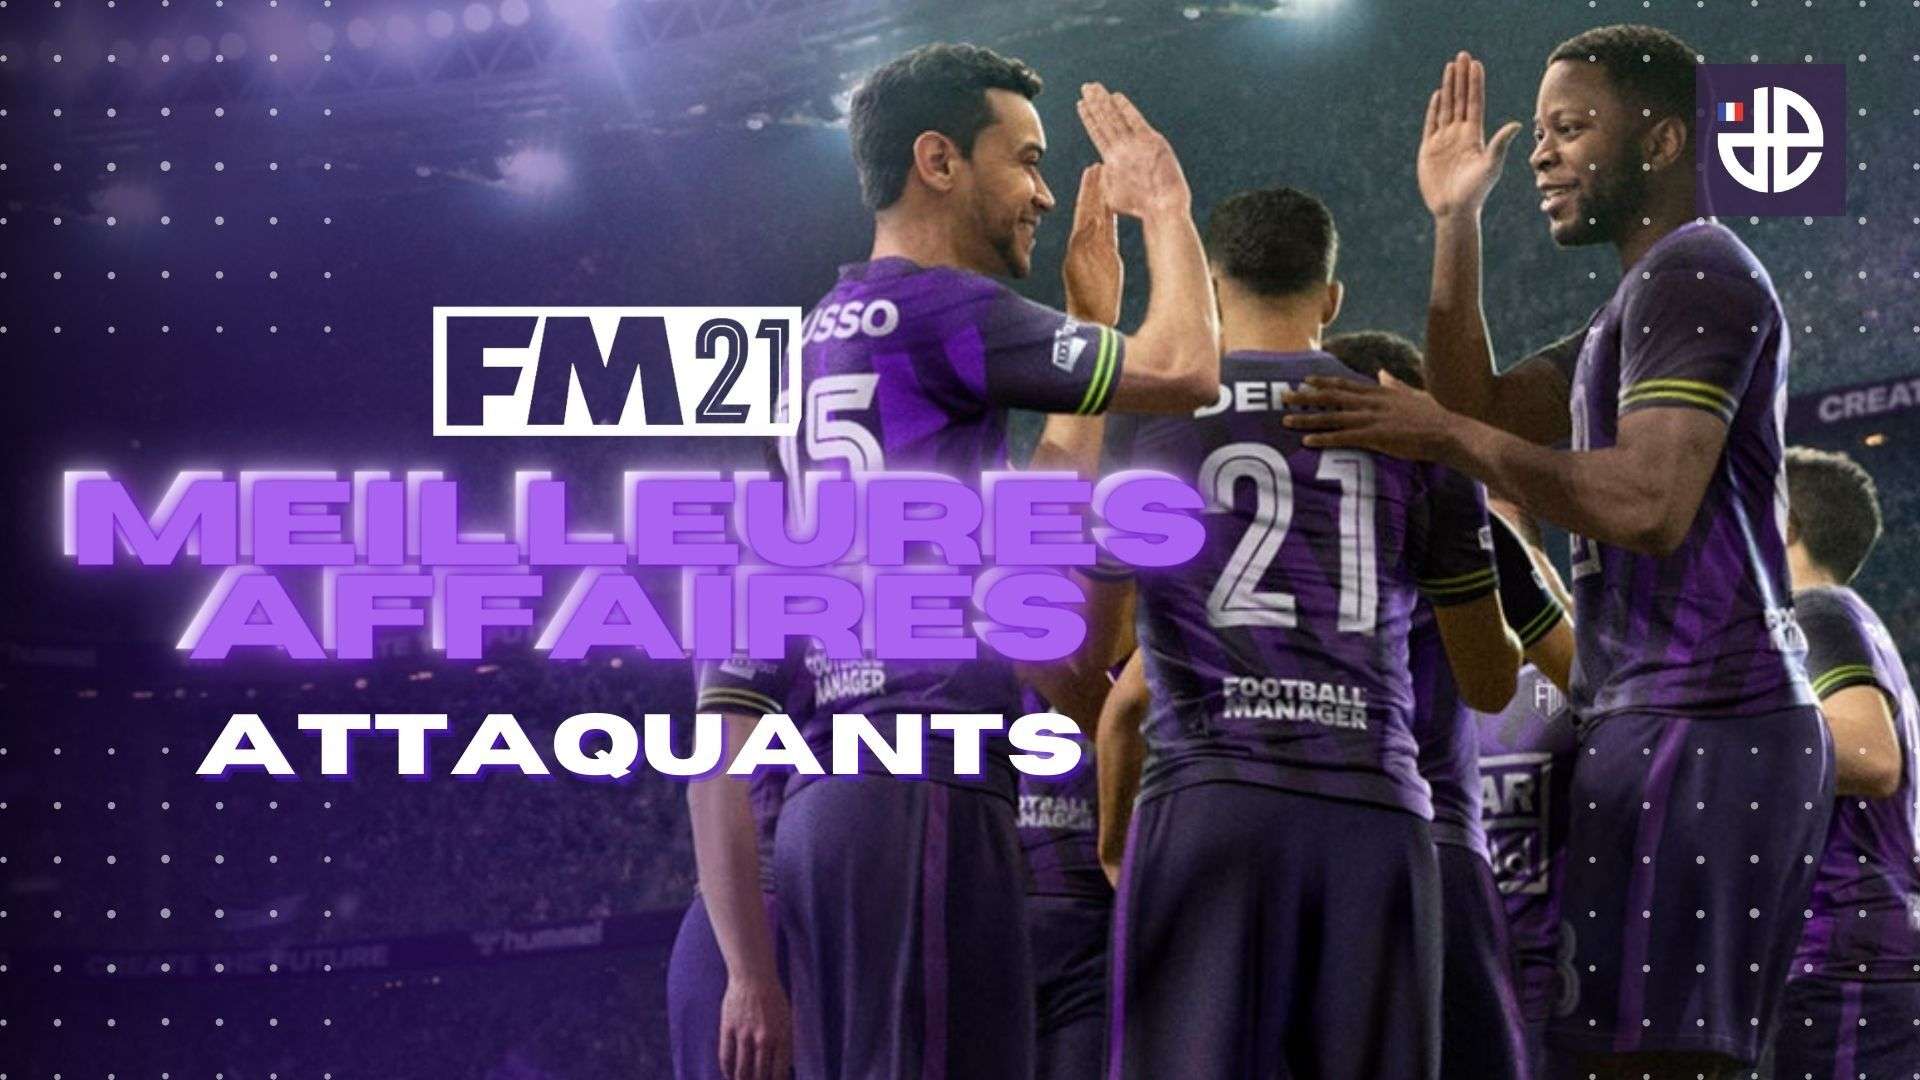 Football Manager 21 attaquants gargains